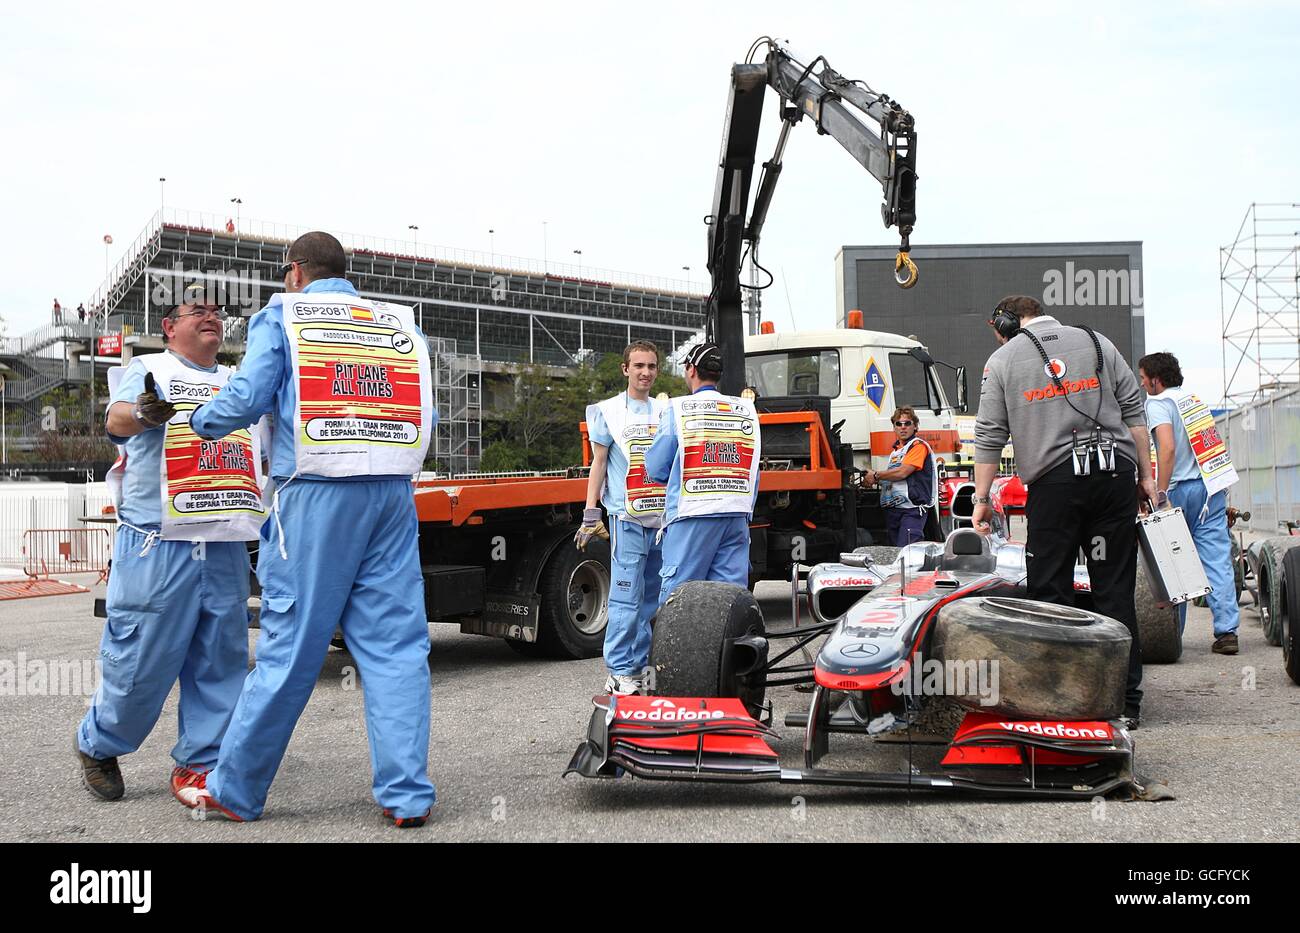 General view of Lewis Hamilton of McLaren's car after his crash towards the end of the Spanish Grand Prix Stock Photo